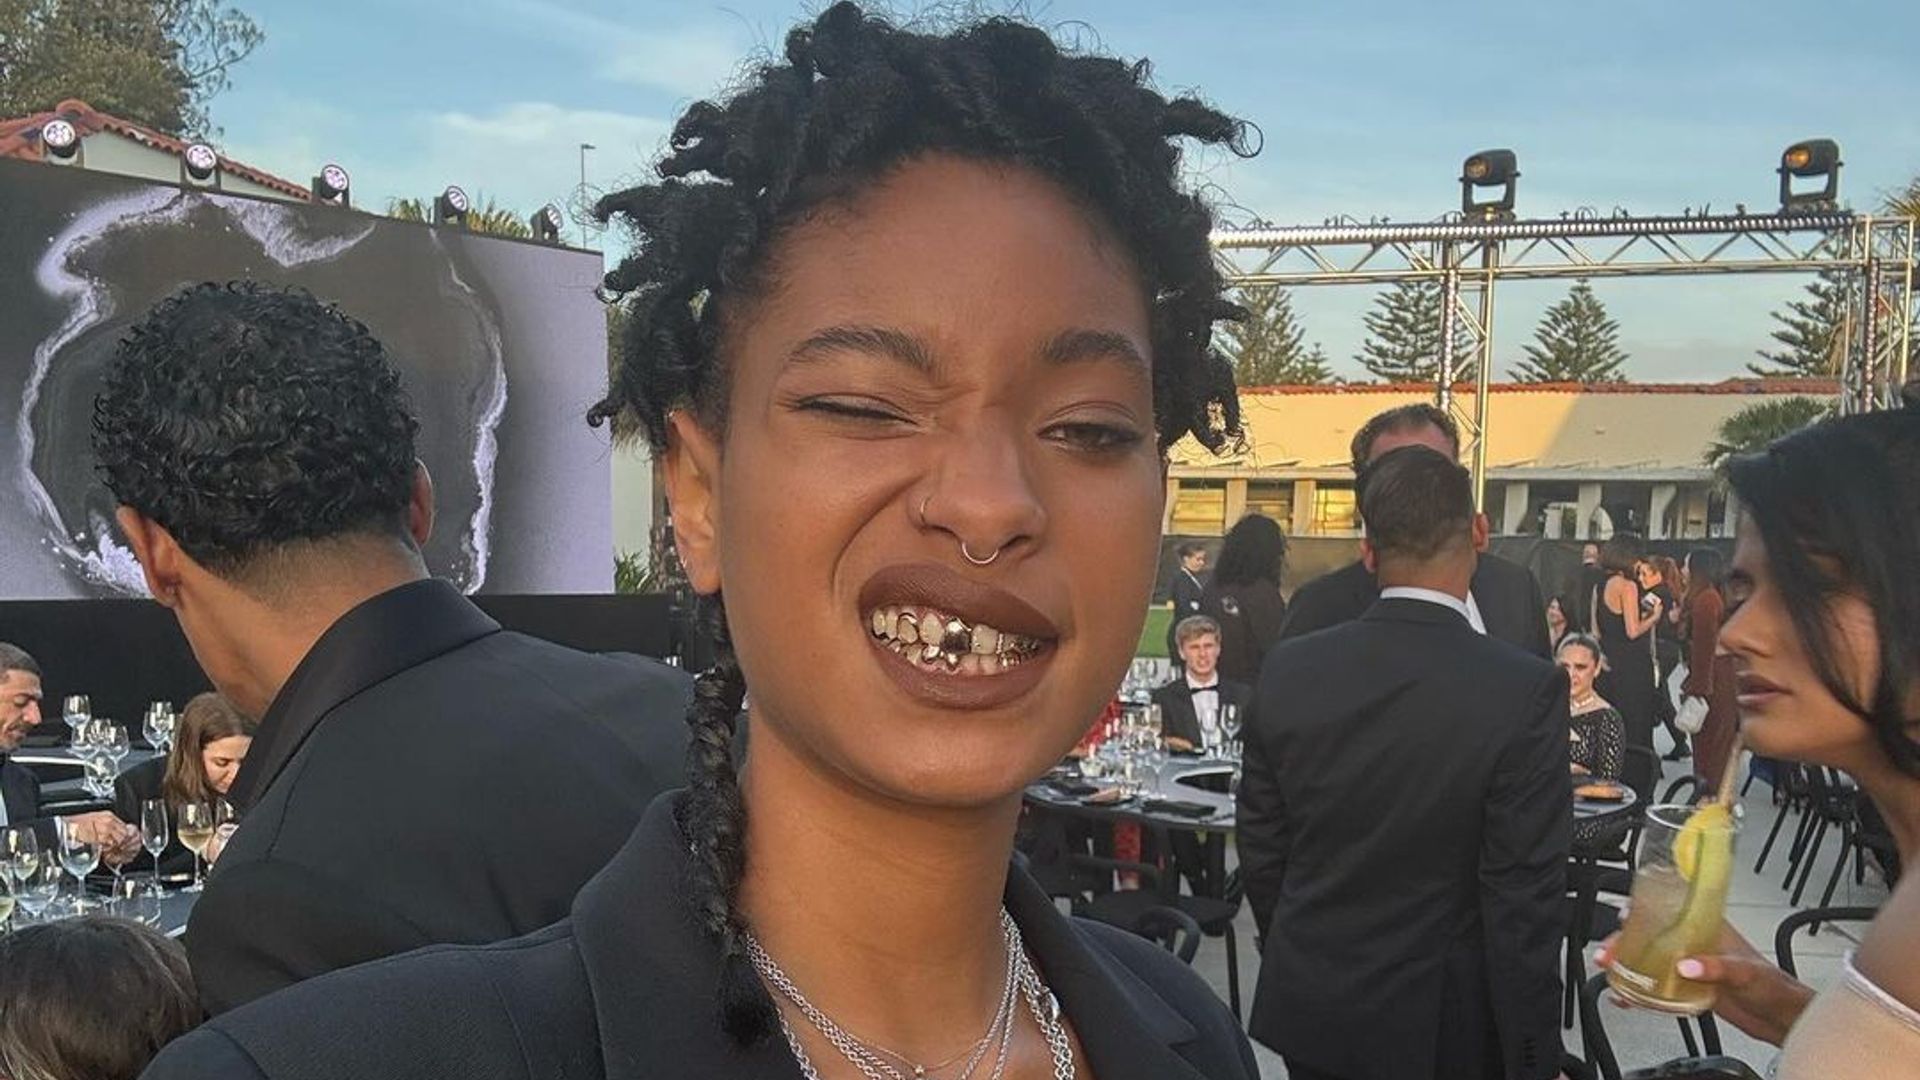 Willow Smith sporting her rose gold grillz 